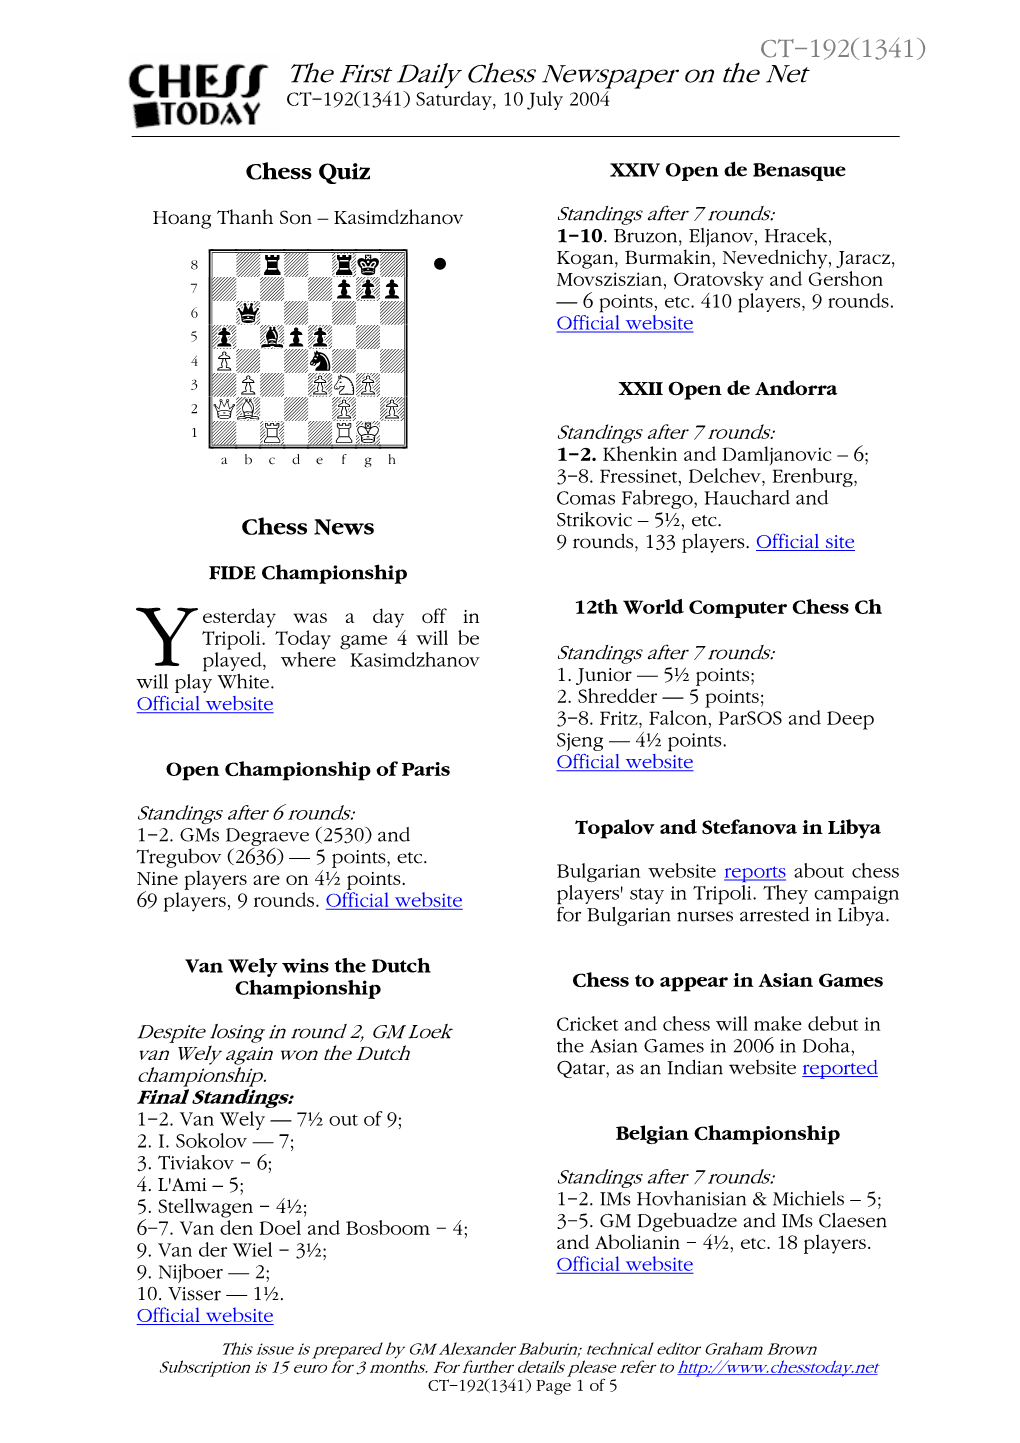 The First Daily Chess Newspaper on The